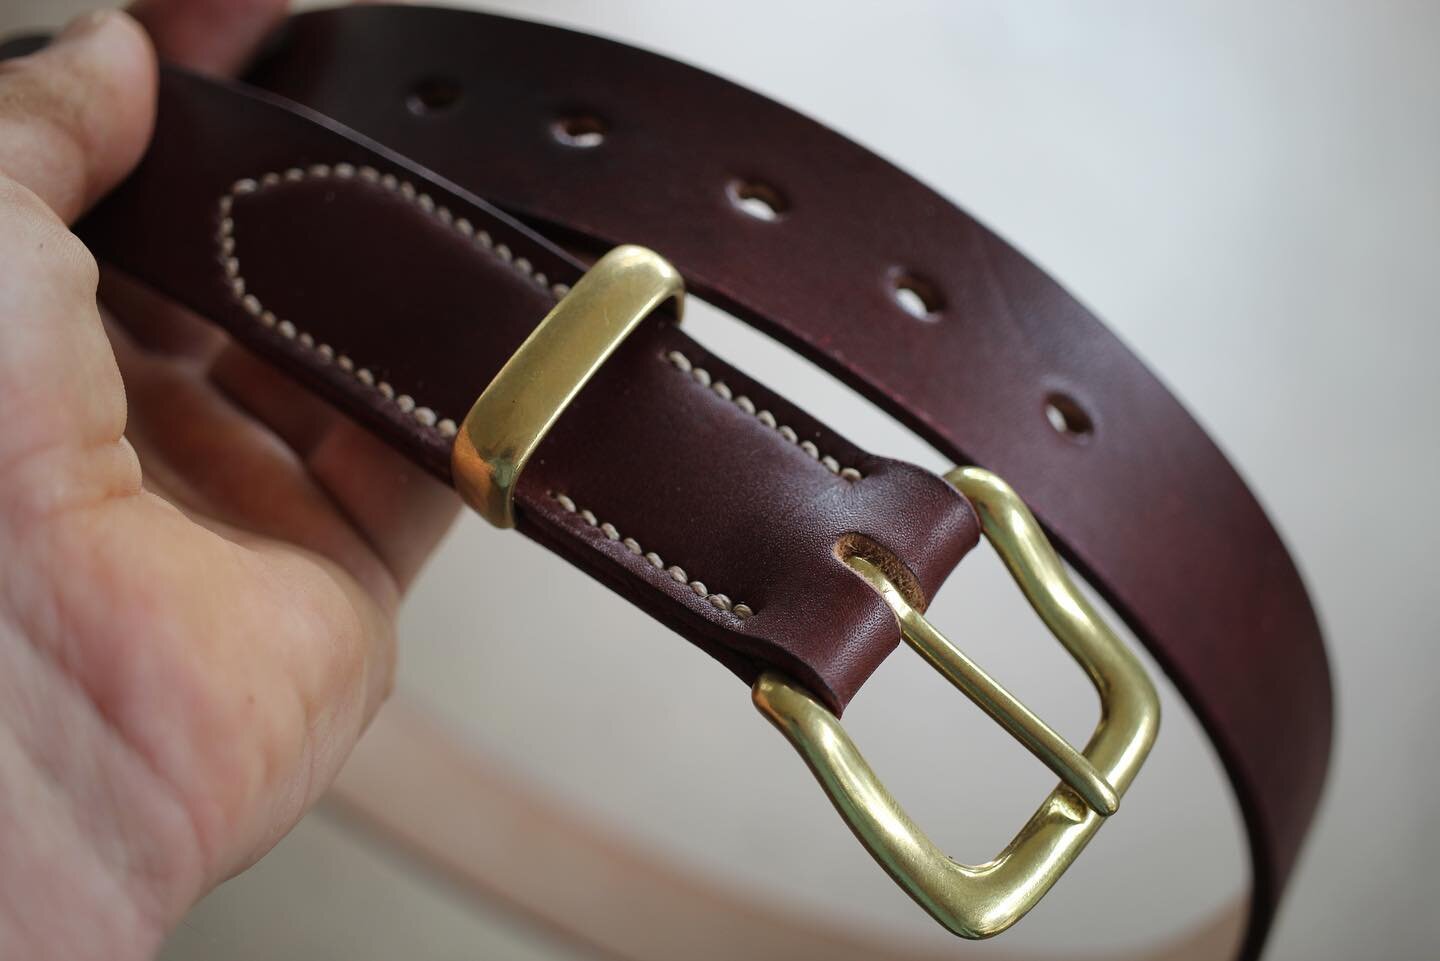 Hand stitched with a hand rolled barbours linen thread&hellip;
.
1 1/4&rdquo; belt in @bakerstannerycolyton oxblood bridle butt.
.
As always, made to measure, made to order.
.
.

#belts #bridleleather #leathercraft #jamesbyoung #alicesprings #central